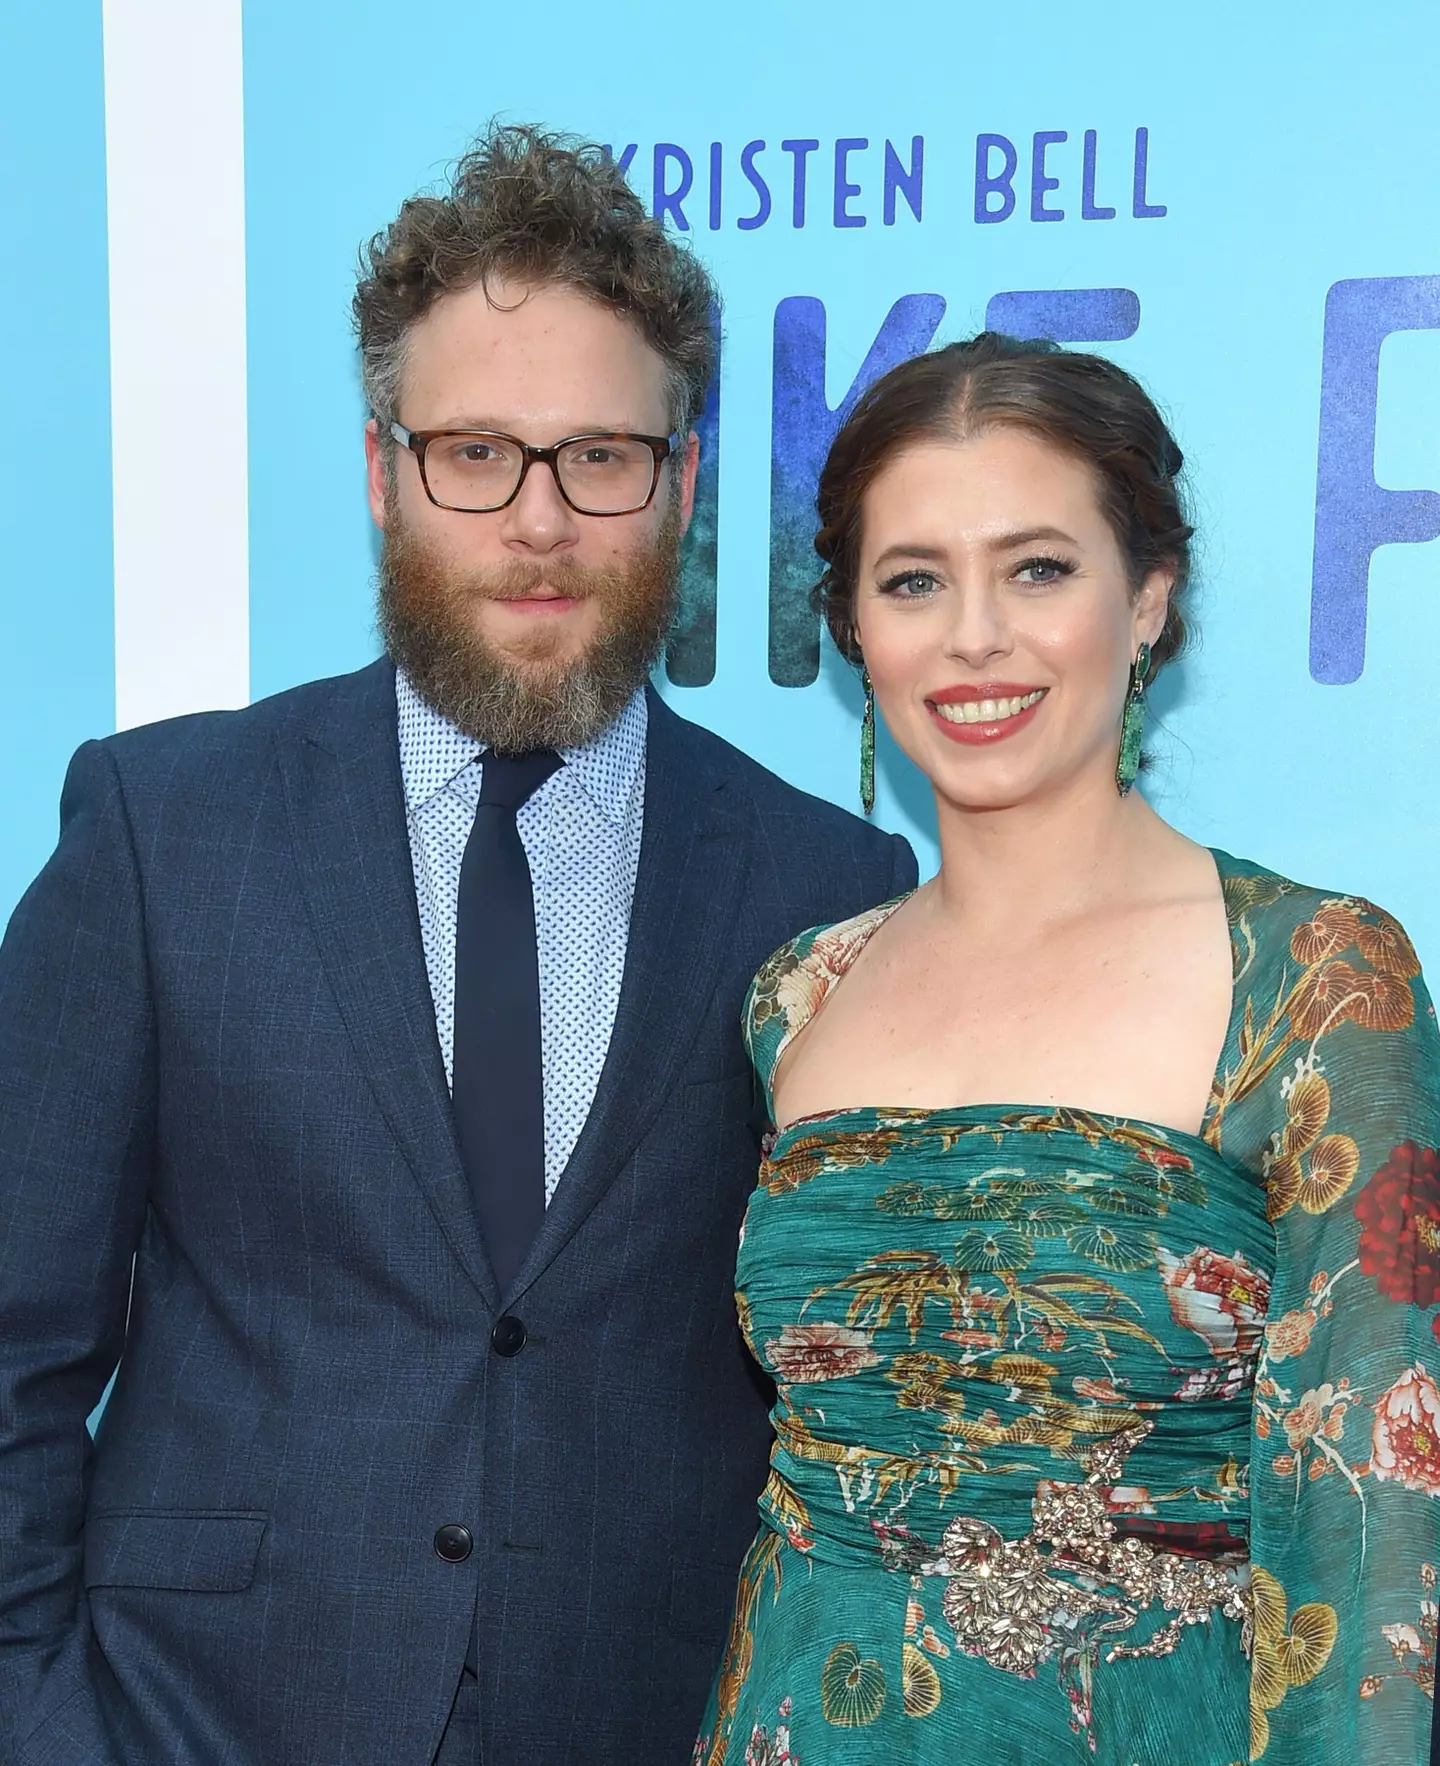 Seth Rogen has revealed the reason he and his wife Lauren Miller don’t want kids.